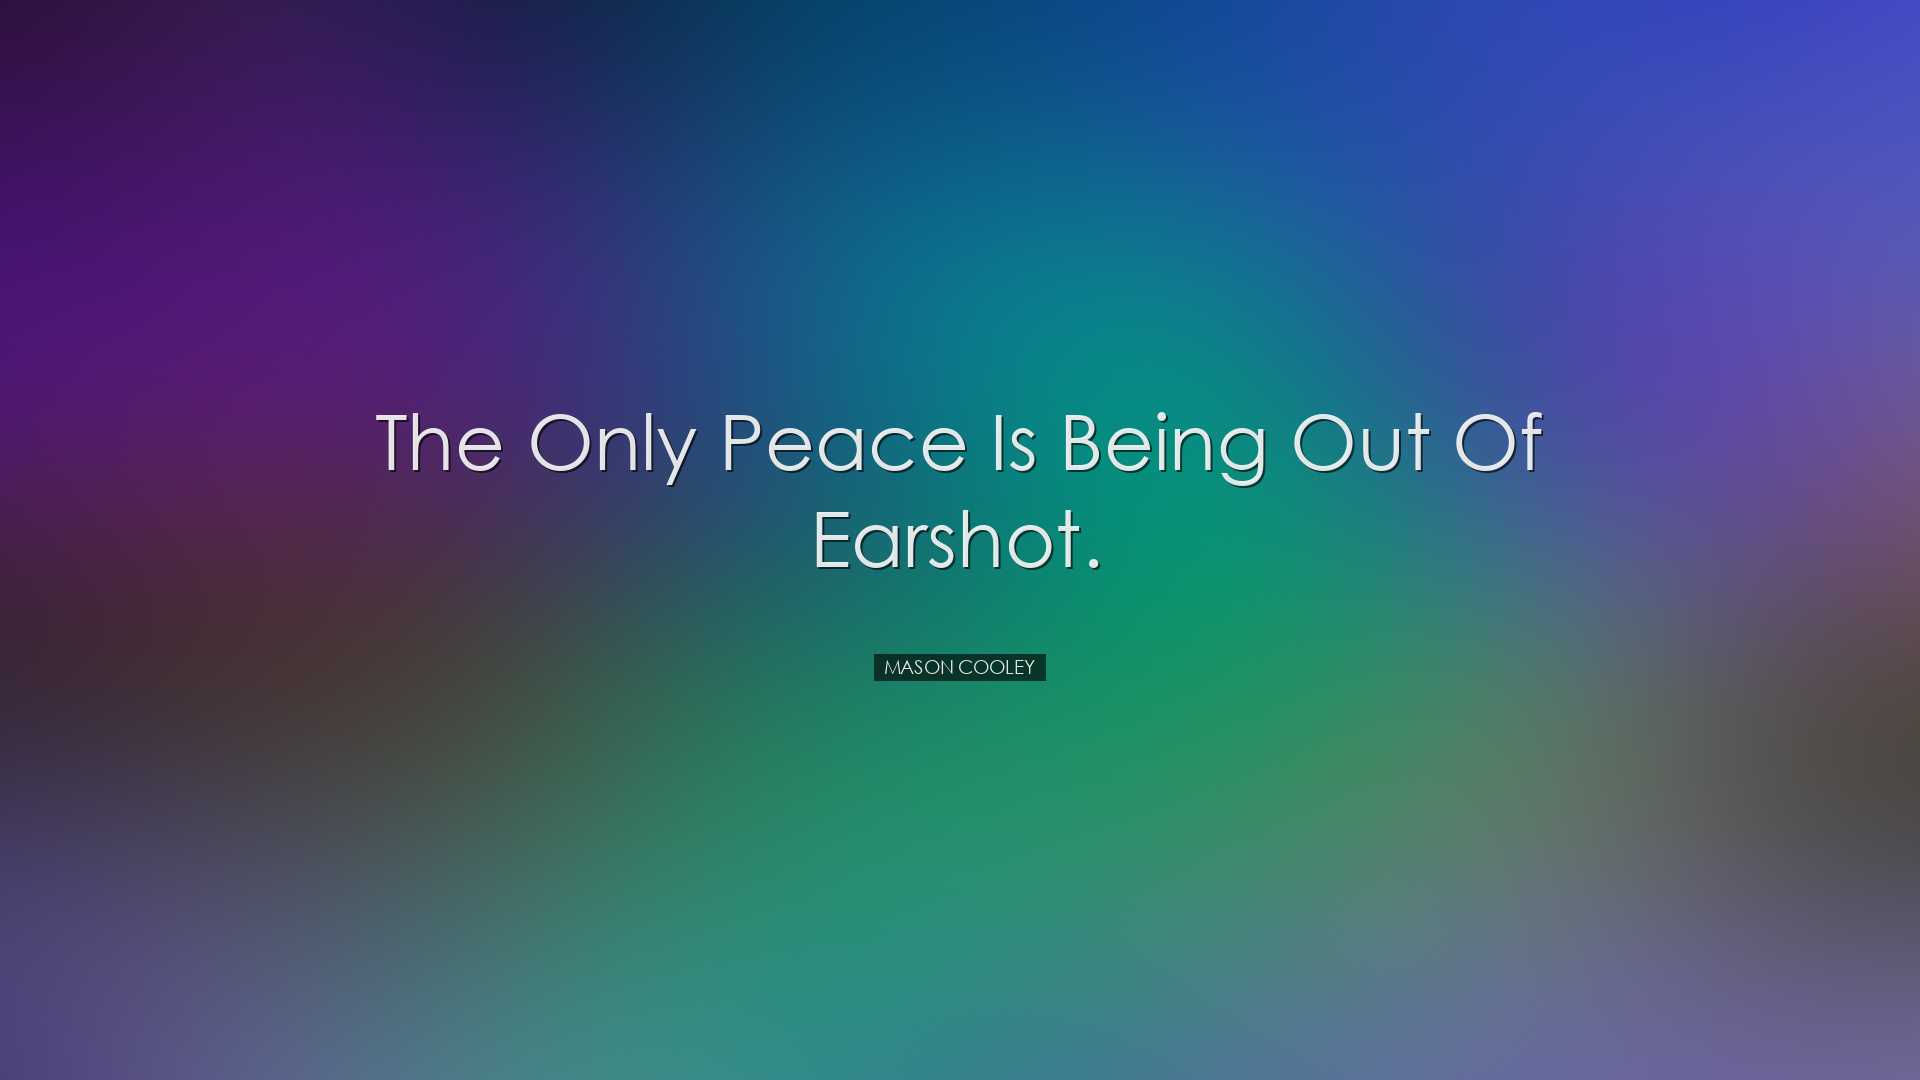 The only peace is being out of earshot. - Mason Cooley